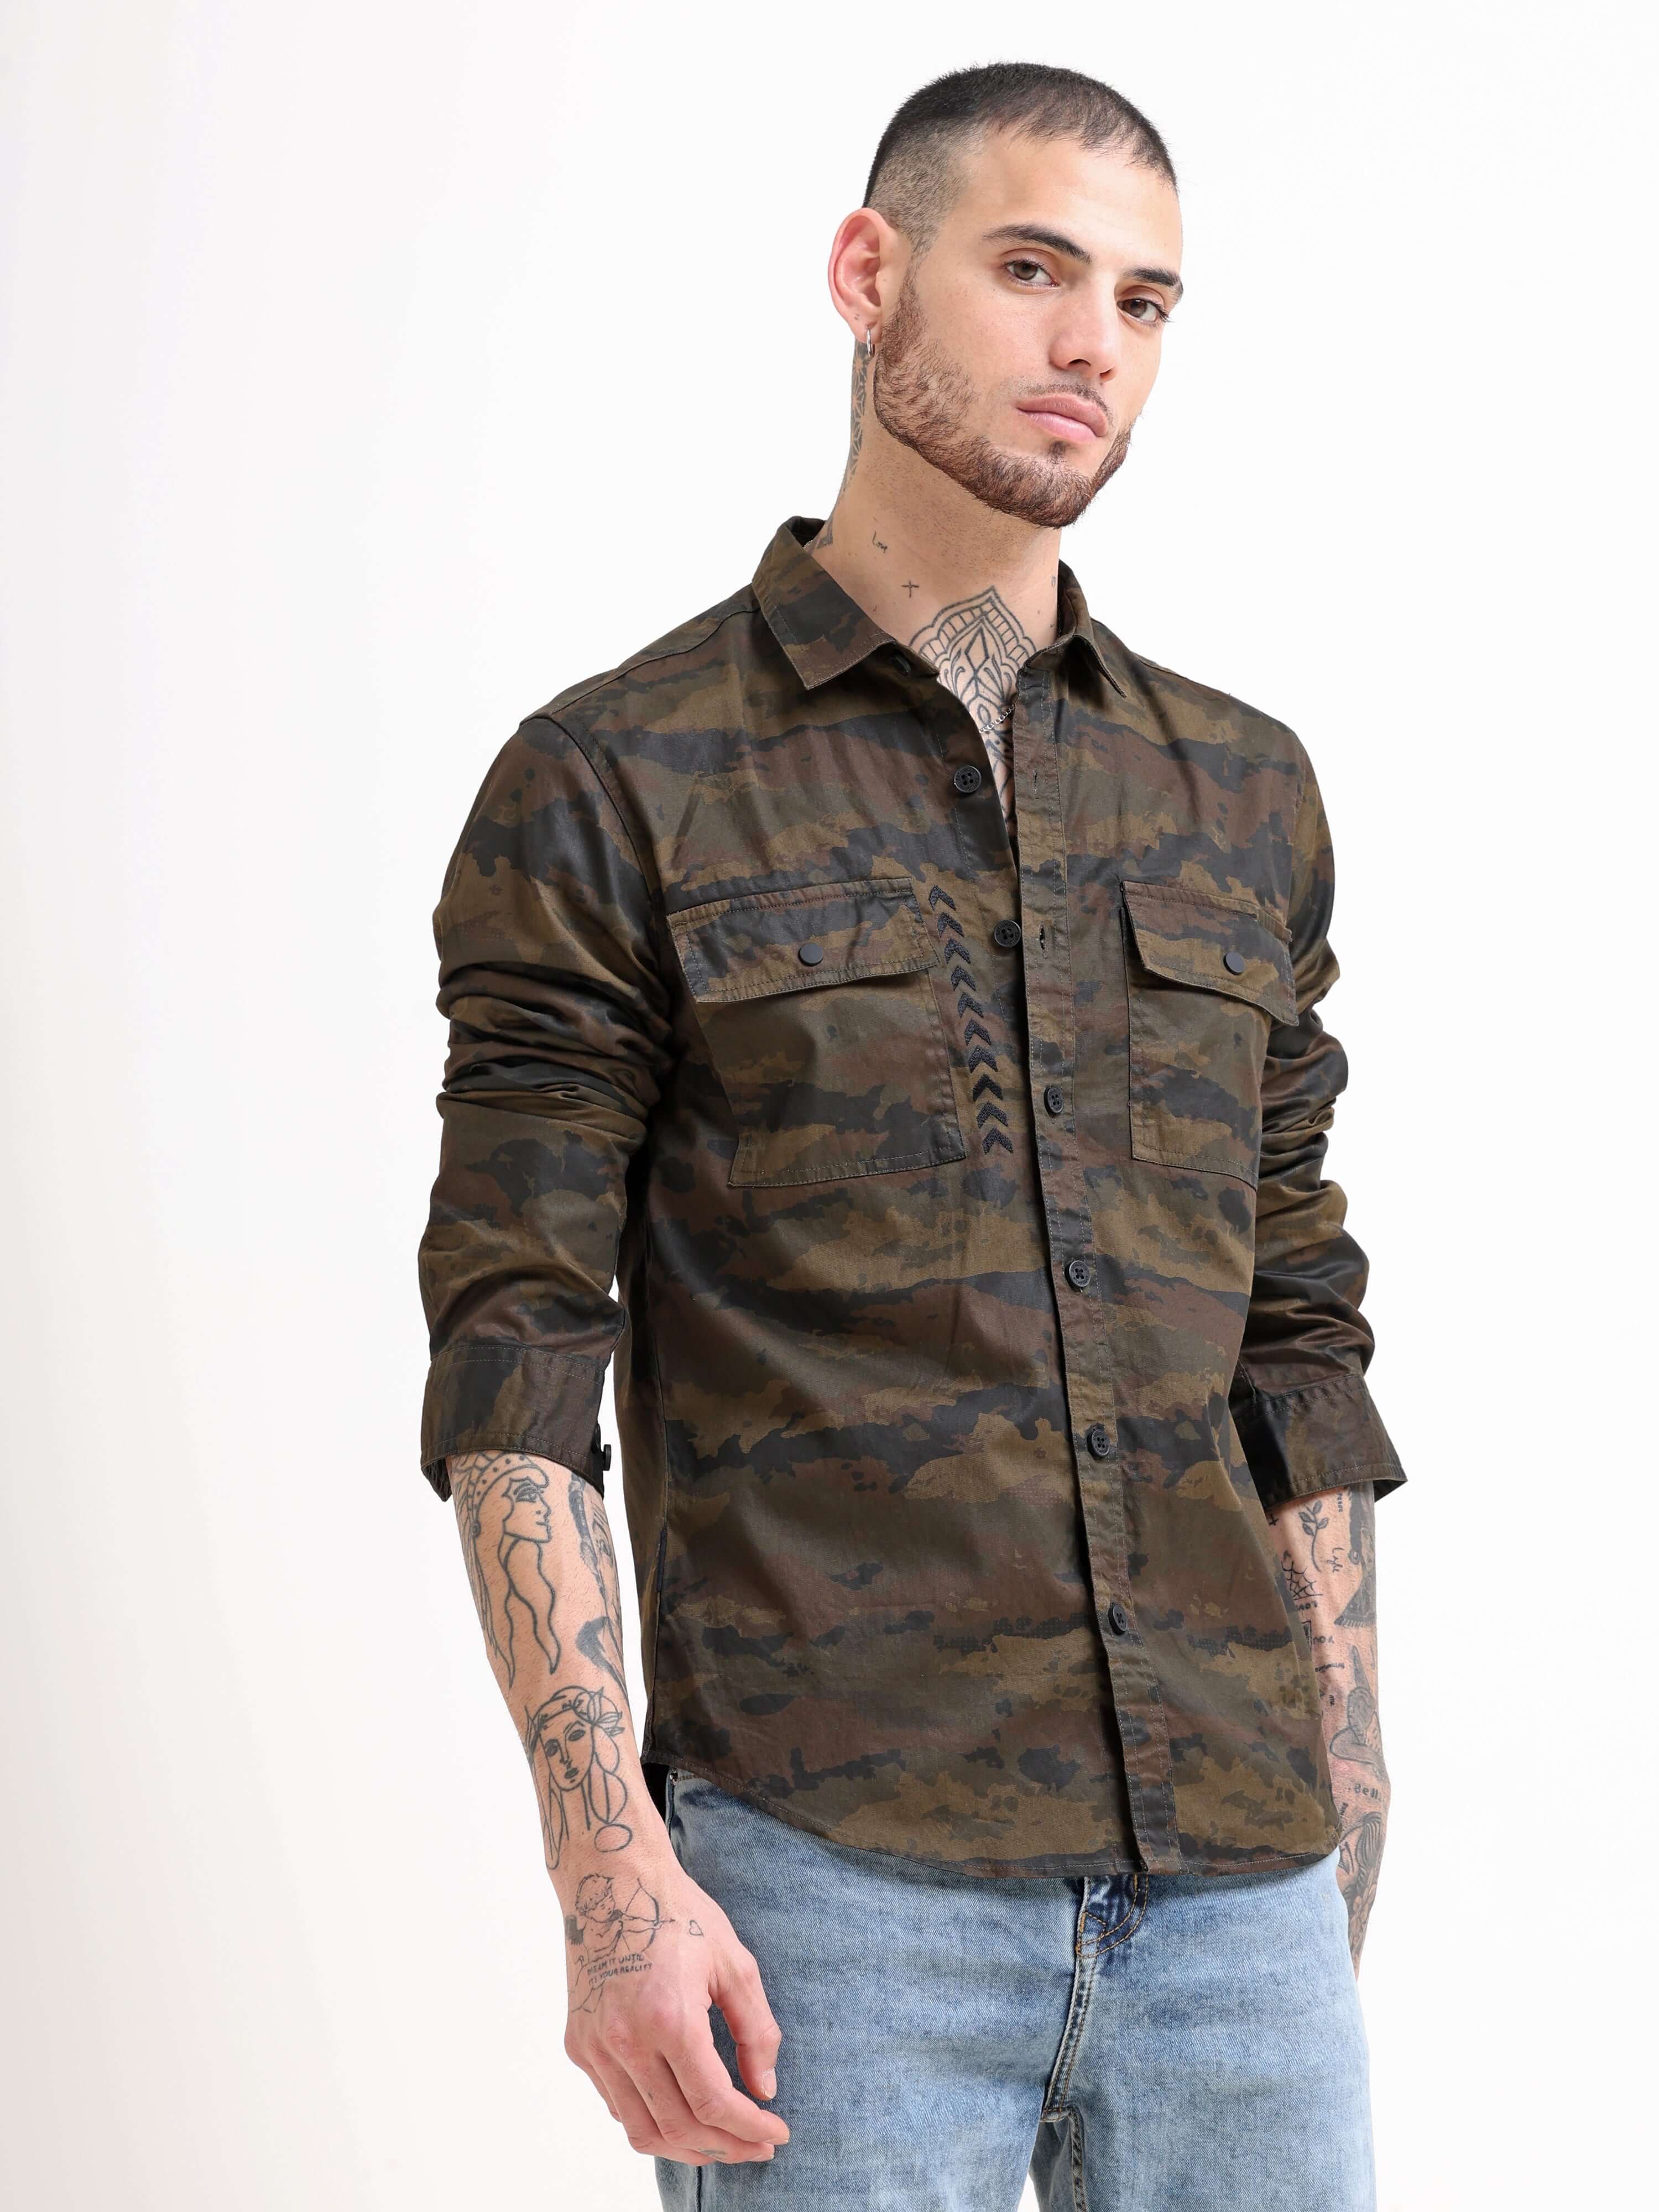 Army Green Camo Cargo Shirt shop online at Estilocus. Create an impeccably stylish look with this dark olive shirt from Estilocus. Crafted from cotton, this comfortable-fit shirt delivers outstanding comfort. This printed shirt is also designed with full